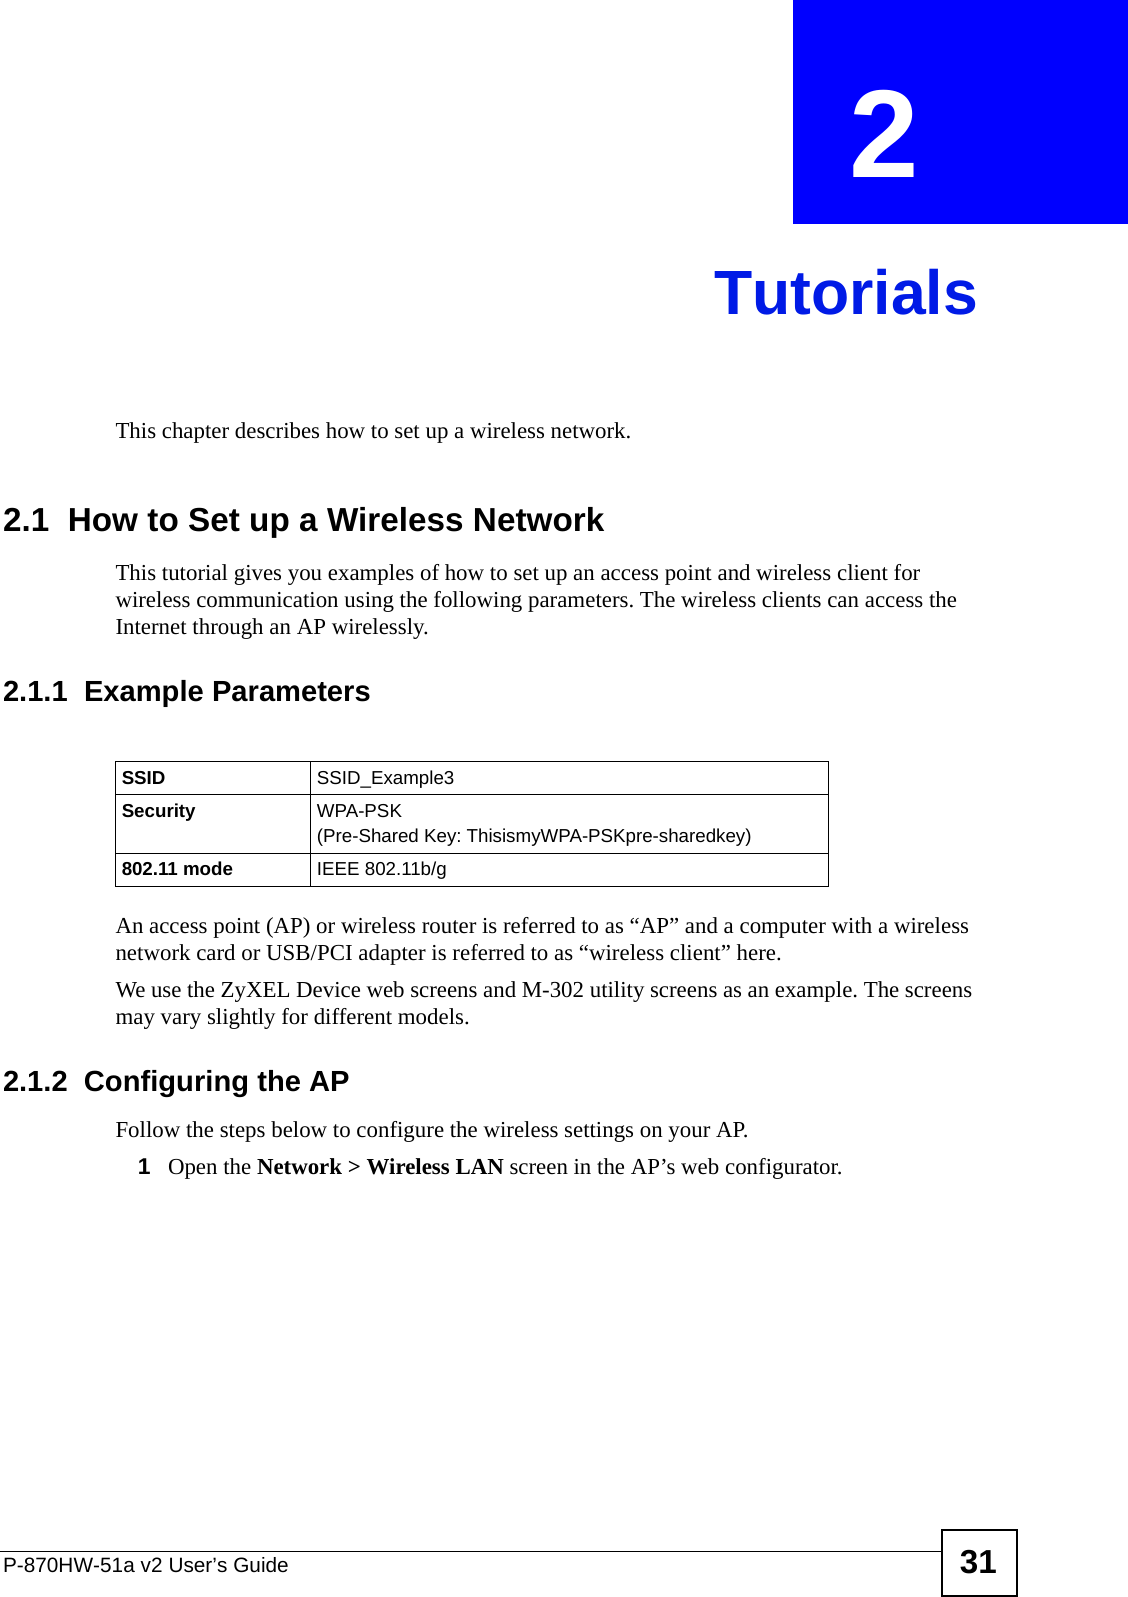 P-870HW-51a v2 User’s Guide 31CHAPTER  2 TutorialsThis chapter describes how to set up a wireless network.2.1  How to Set up a Wireless NetworkThis tutorial gives you examples of how to set up an access point and wireless client for wireless communication using the following parameters. The wireless clients can access the Internet through an AP wirelessly.2.1.1  Example ParametersAn access point (AP) or wireless router is referred to as “AP” and a computer with a wireless network card or USB/PCI adapter is referred to as “wireless client” here.We use the ZyXEL Device web screens and M-302 utility screens as an example. The screens may vary slightly for different models.2.1.2  Configuring the APFollow the steps below to configure the wireless settings on your AP.1Open the Network &gt; Wireless LAN screen in the AP’s web configurator.SSID SSID_Example3Security  WPA-PSK(Pre-Shared Key: ThisismyWPA-PSKpre-sharedkey)802.11 mode IEEE 802.11b/g